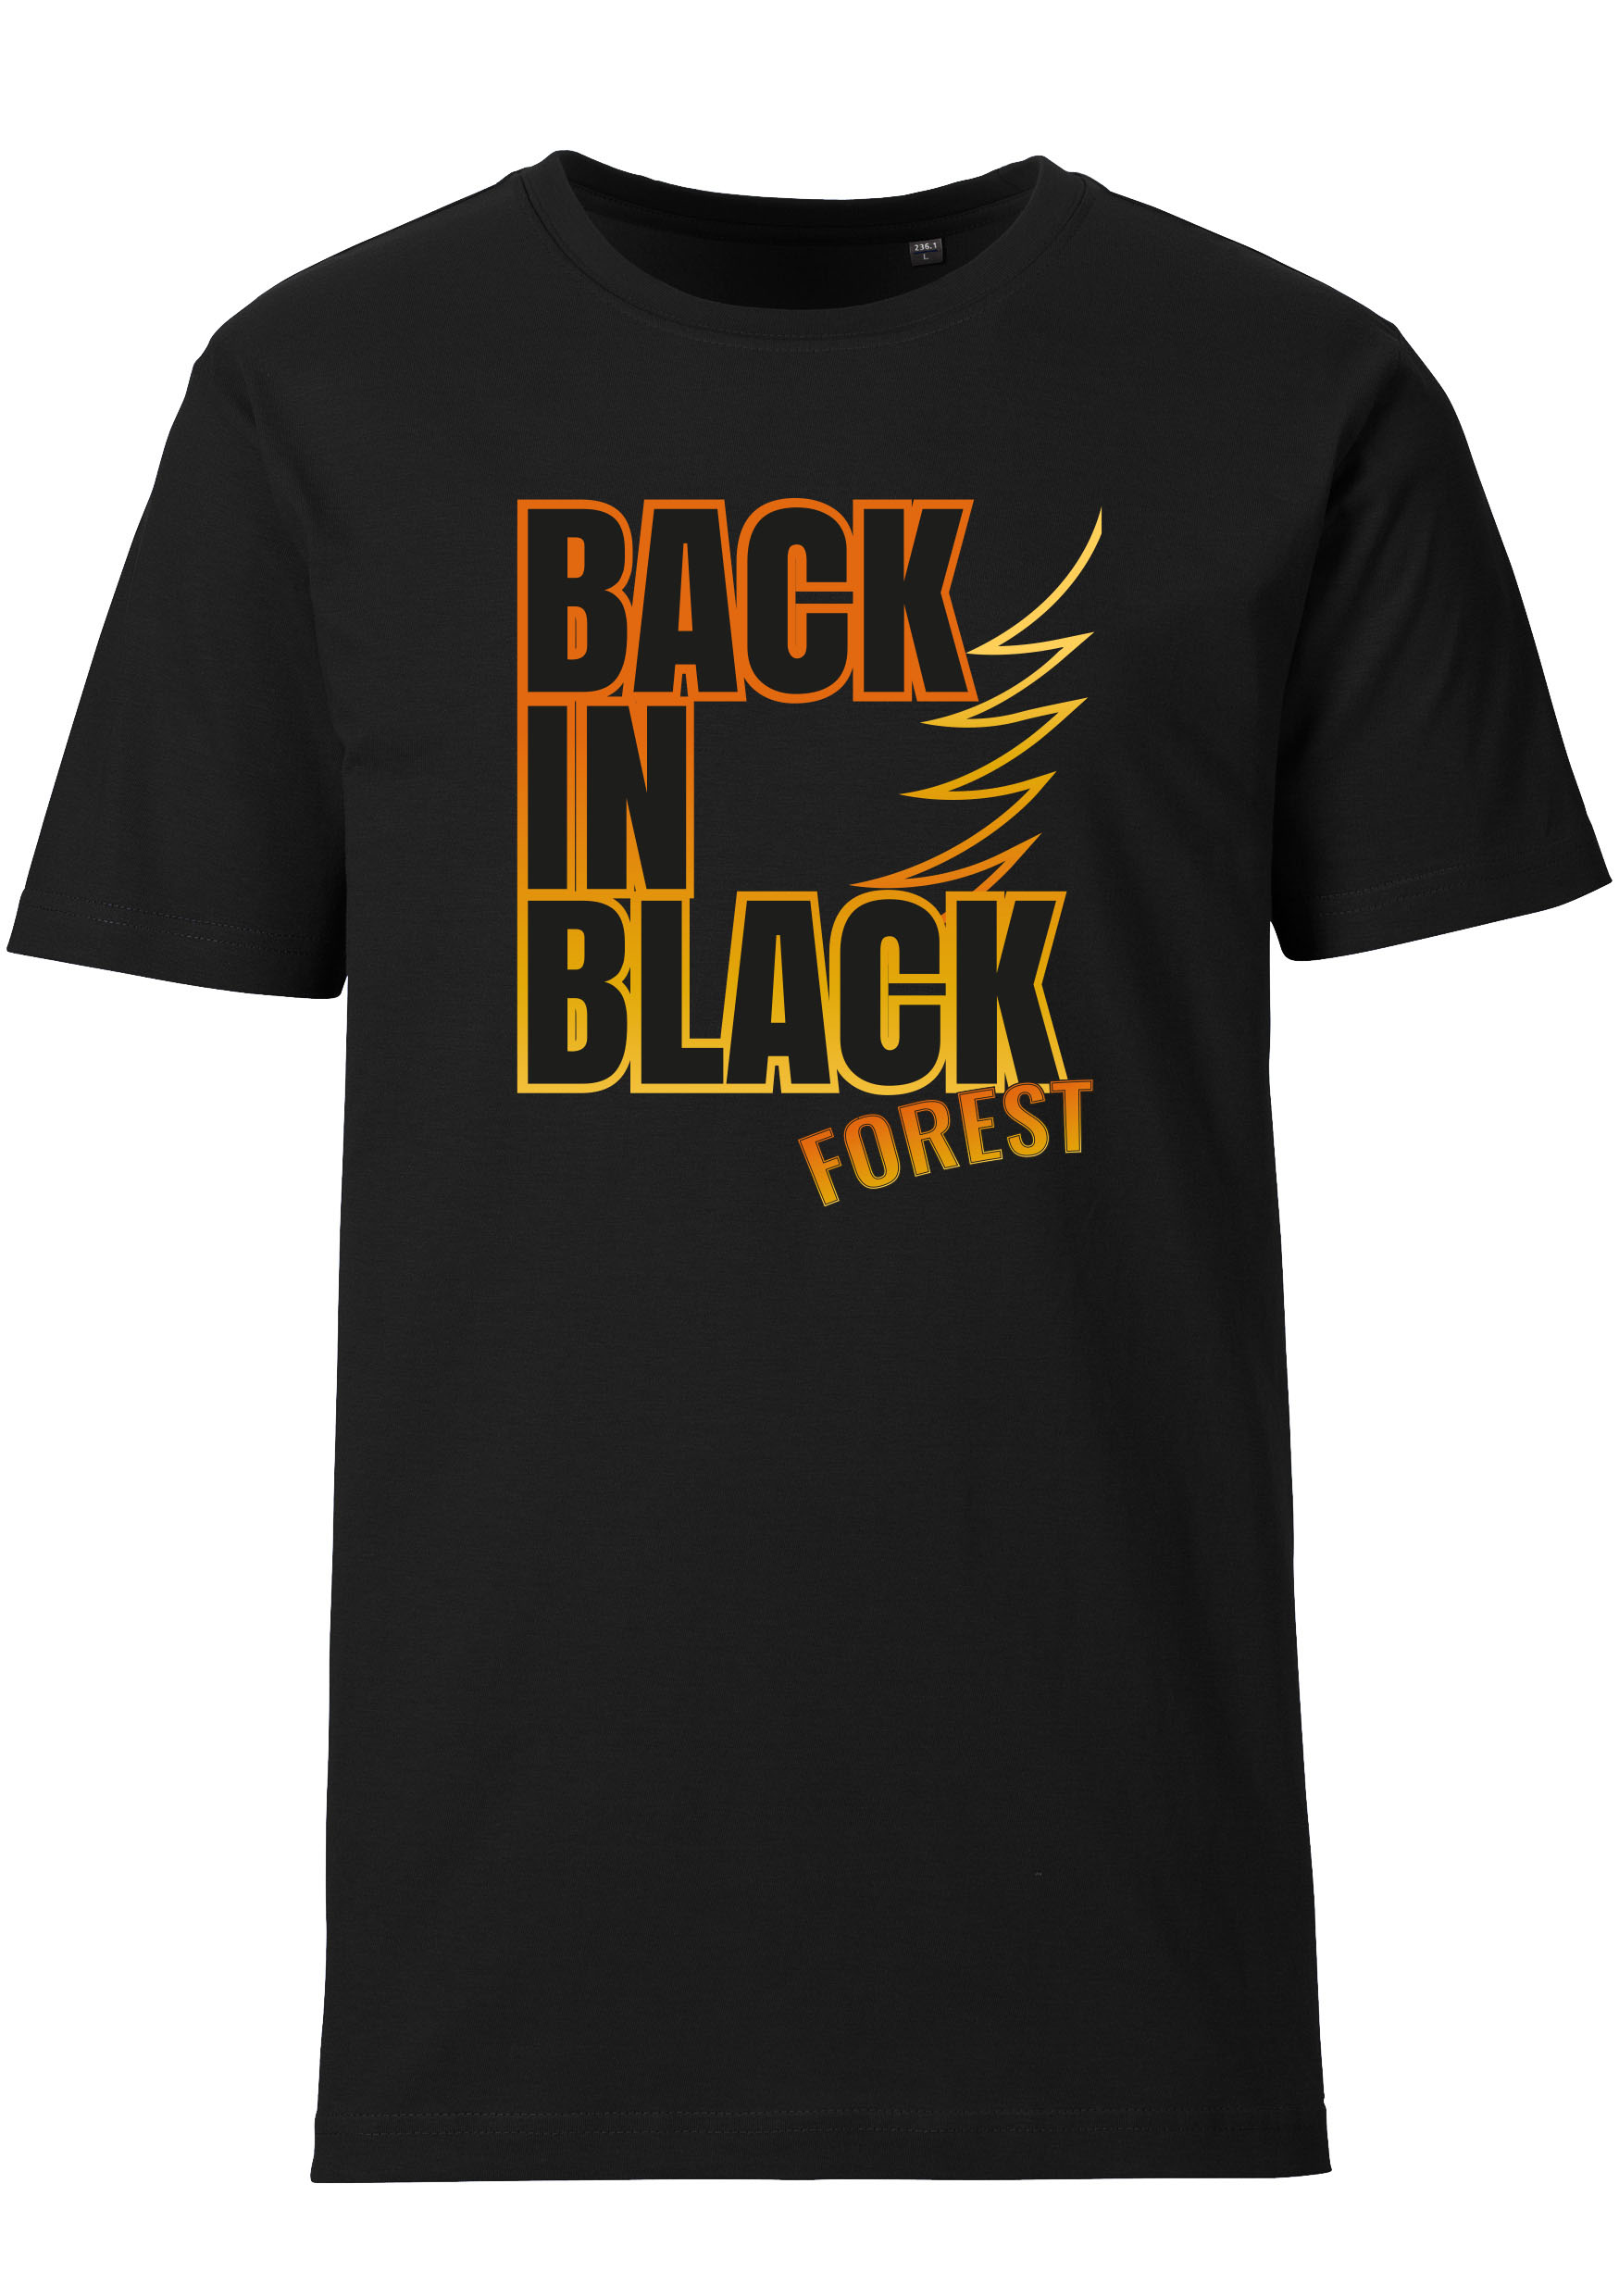 Black Forest Panthers T Shirt Back in Black